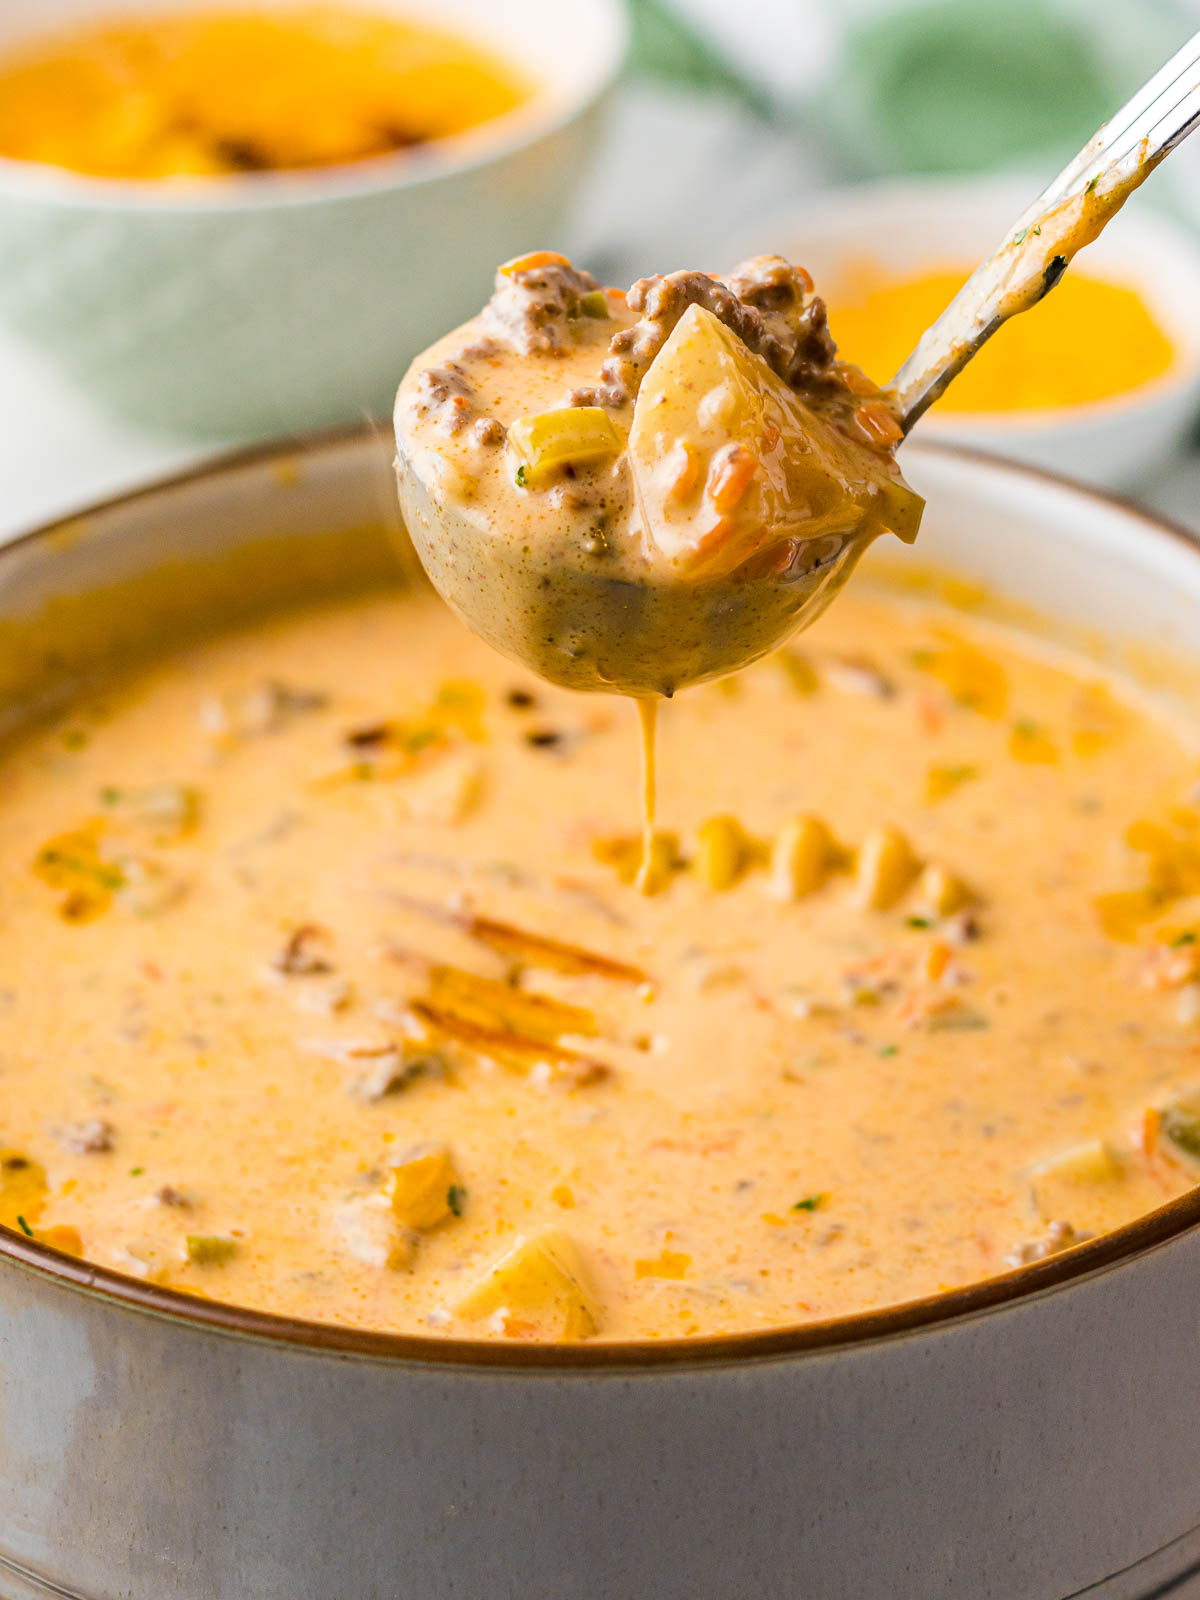 A spoon gets a scoop of Crock Pot Cheeseburger Soup from a bowl.